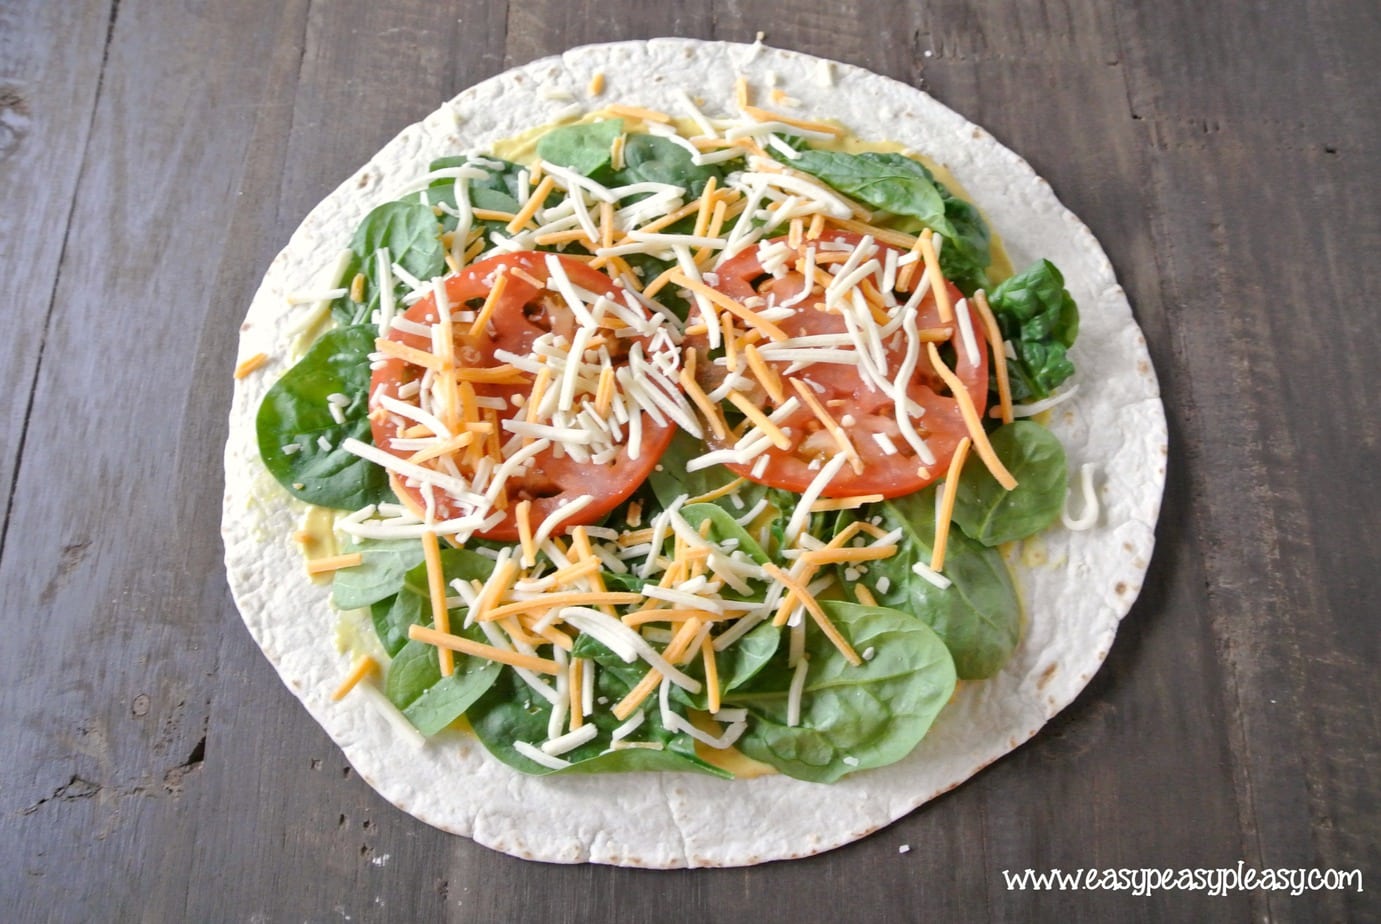 How to make a picture perfect wrap. Shredded or sliced cheese work equally well.